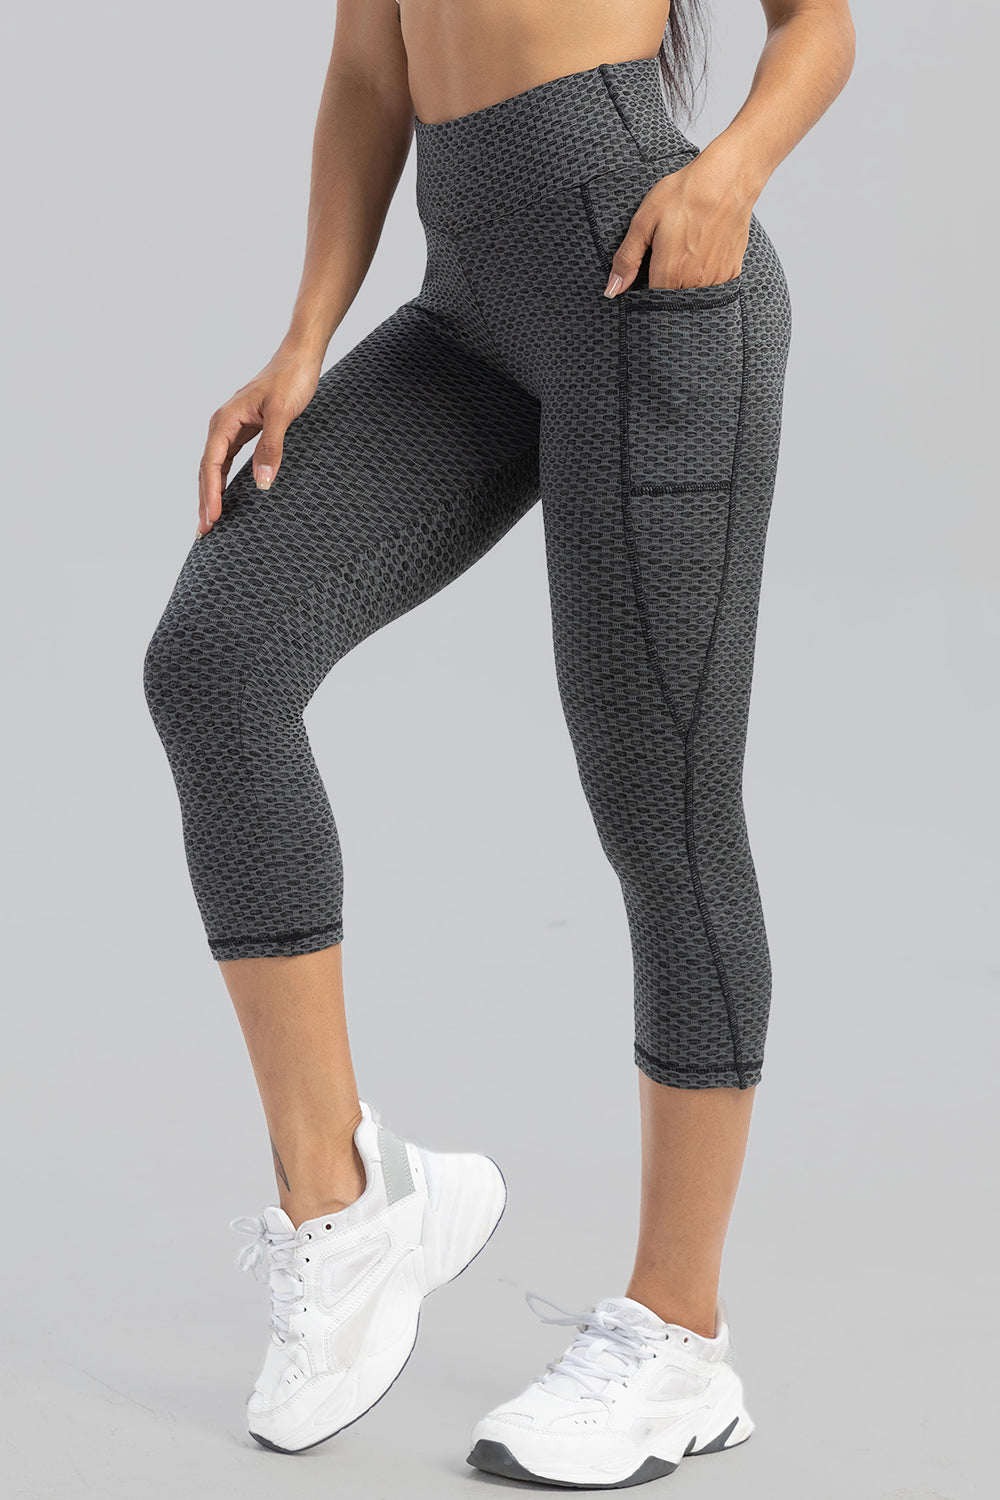 Contrast Stitching High Waist Active Pants - Leggings - FITGGINS